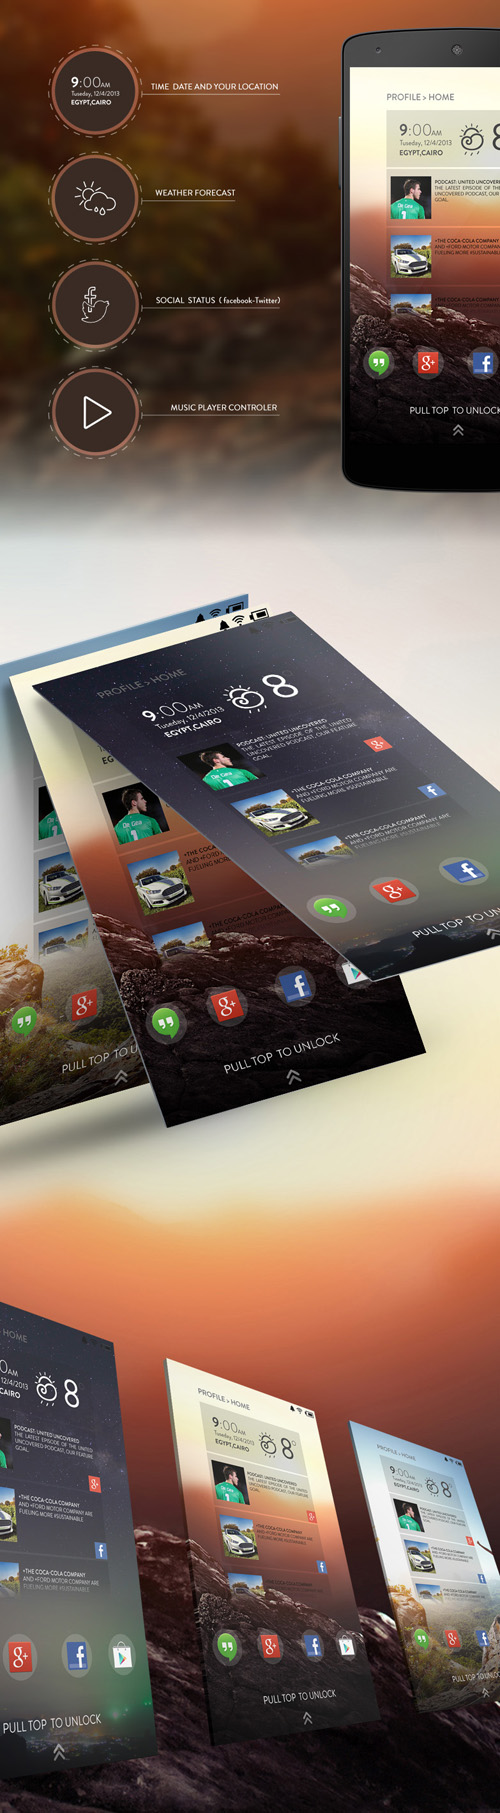 Android Lock-screen UI Designs and Concepts for Inspiration